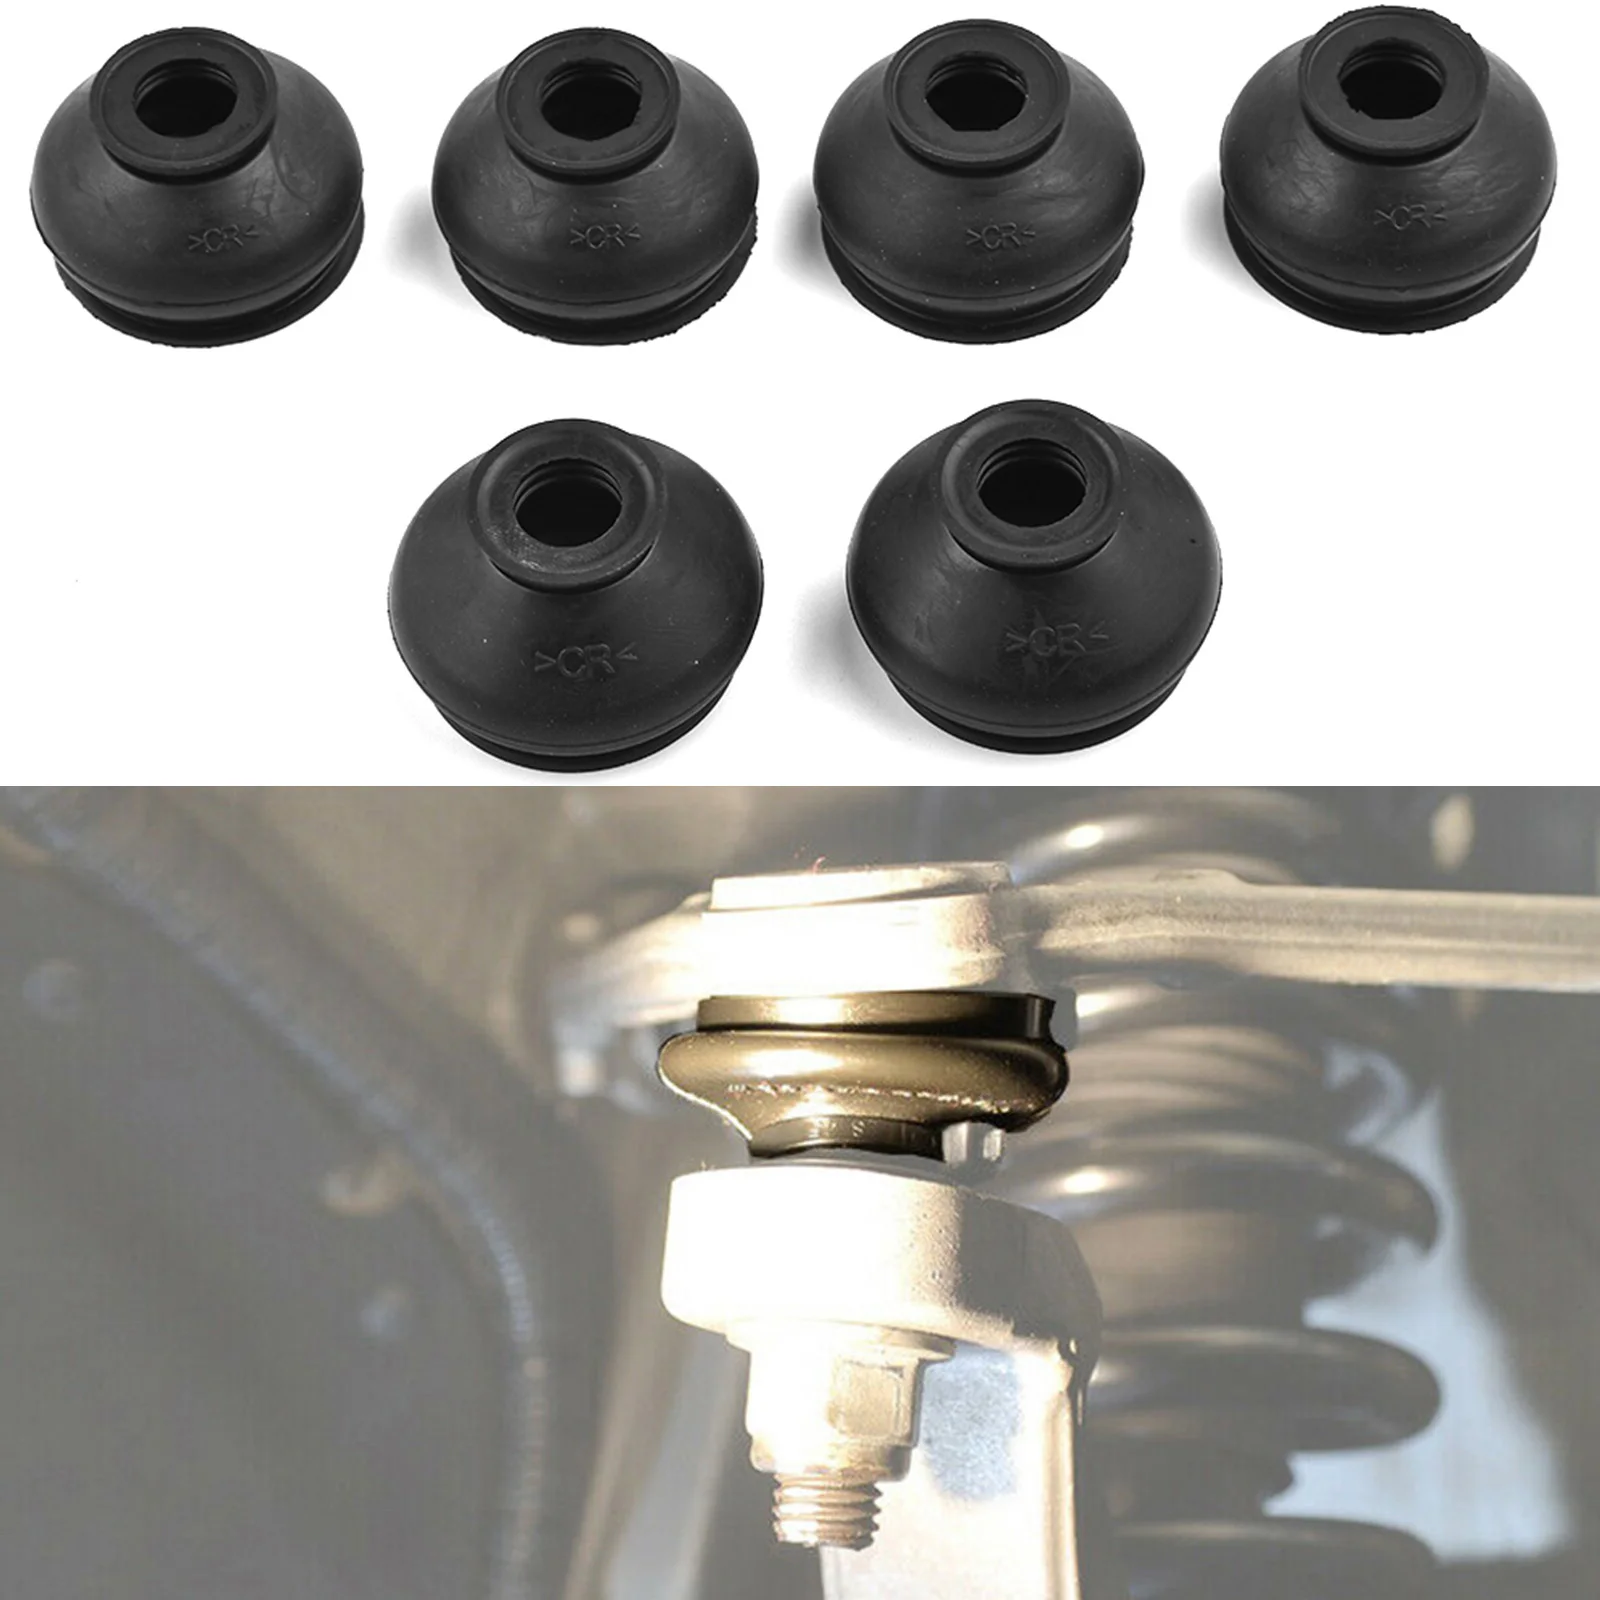 Car Dust Boot Covers Accessories Ball Joint Universal Vehicle 6 Pcs/set Decor Gaiters Parts Replacement Rubber front fork shock dust covers gaiters boots rubber for honda xlr250